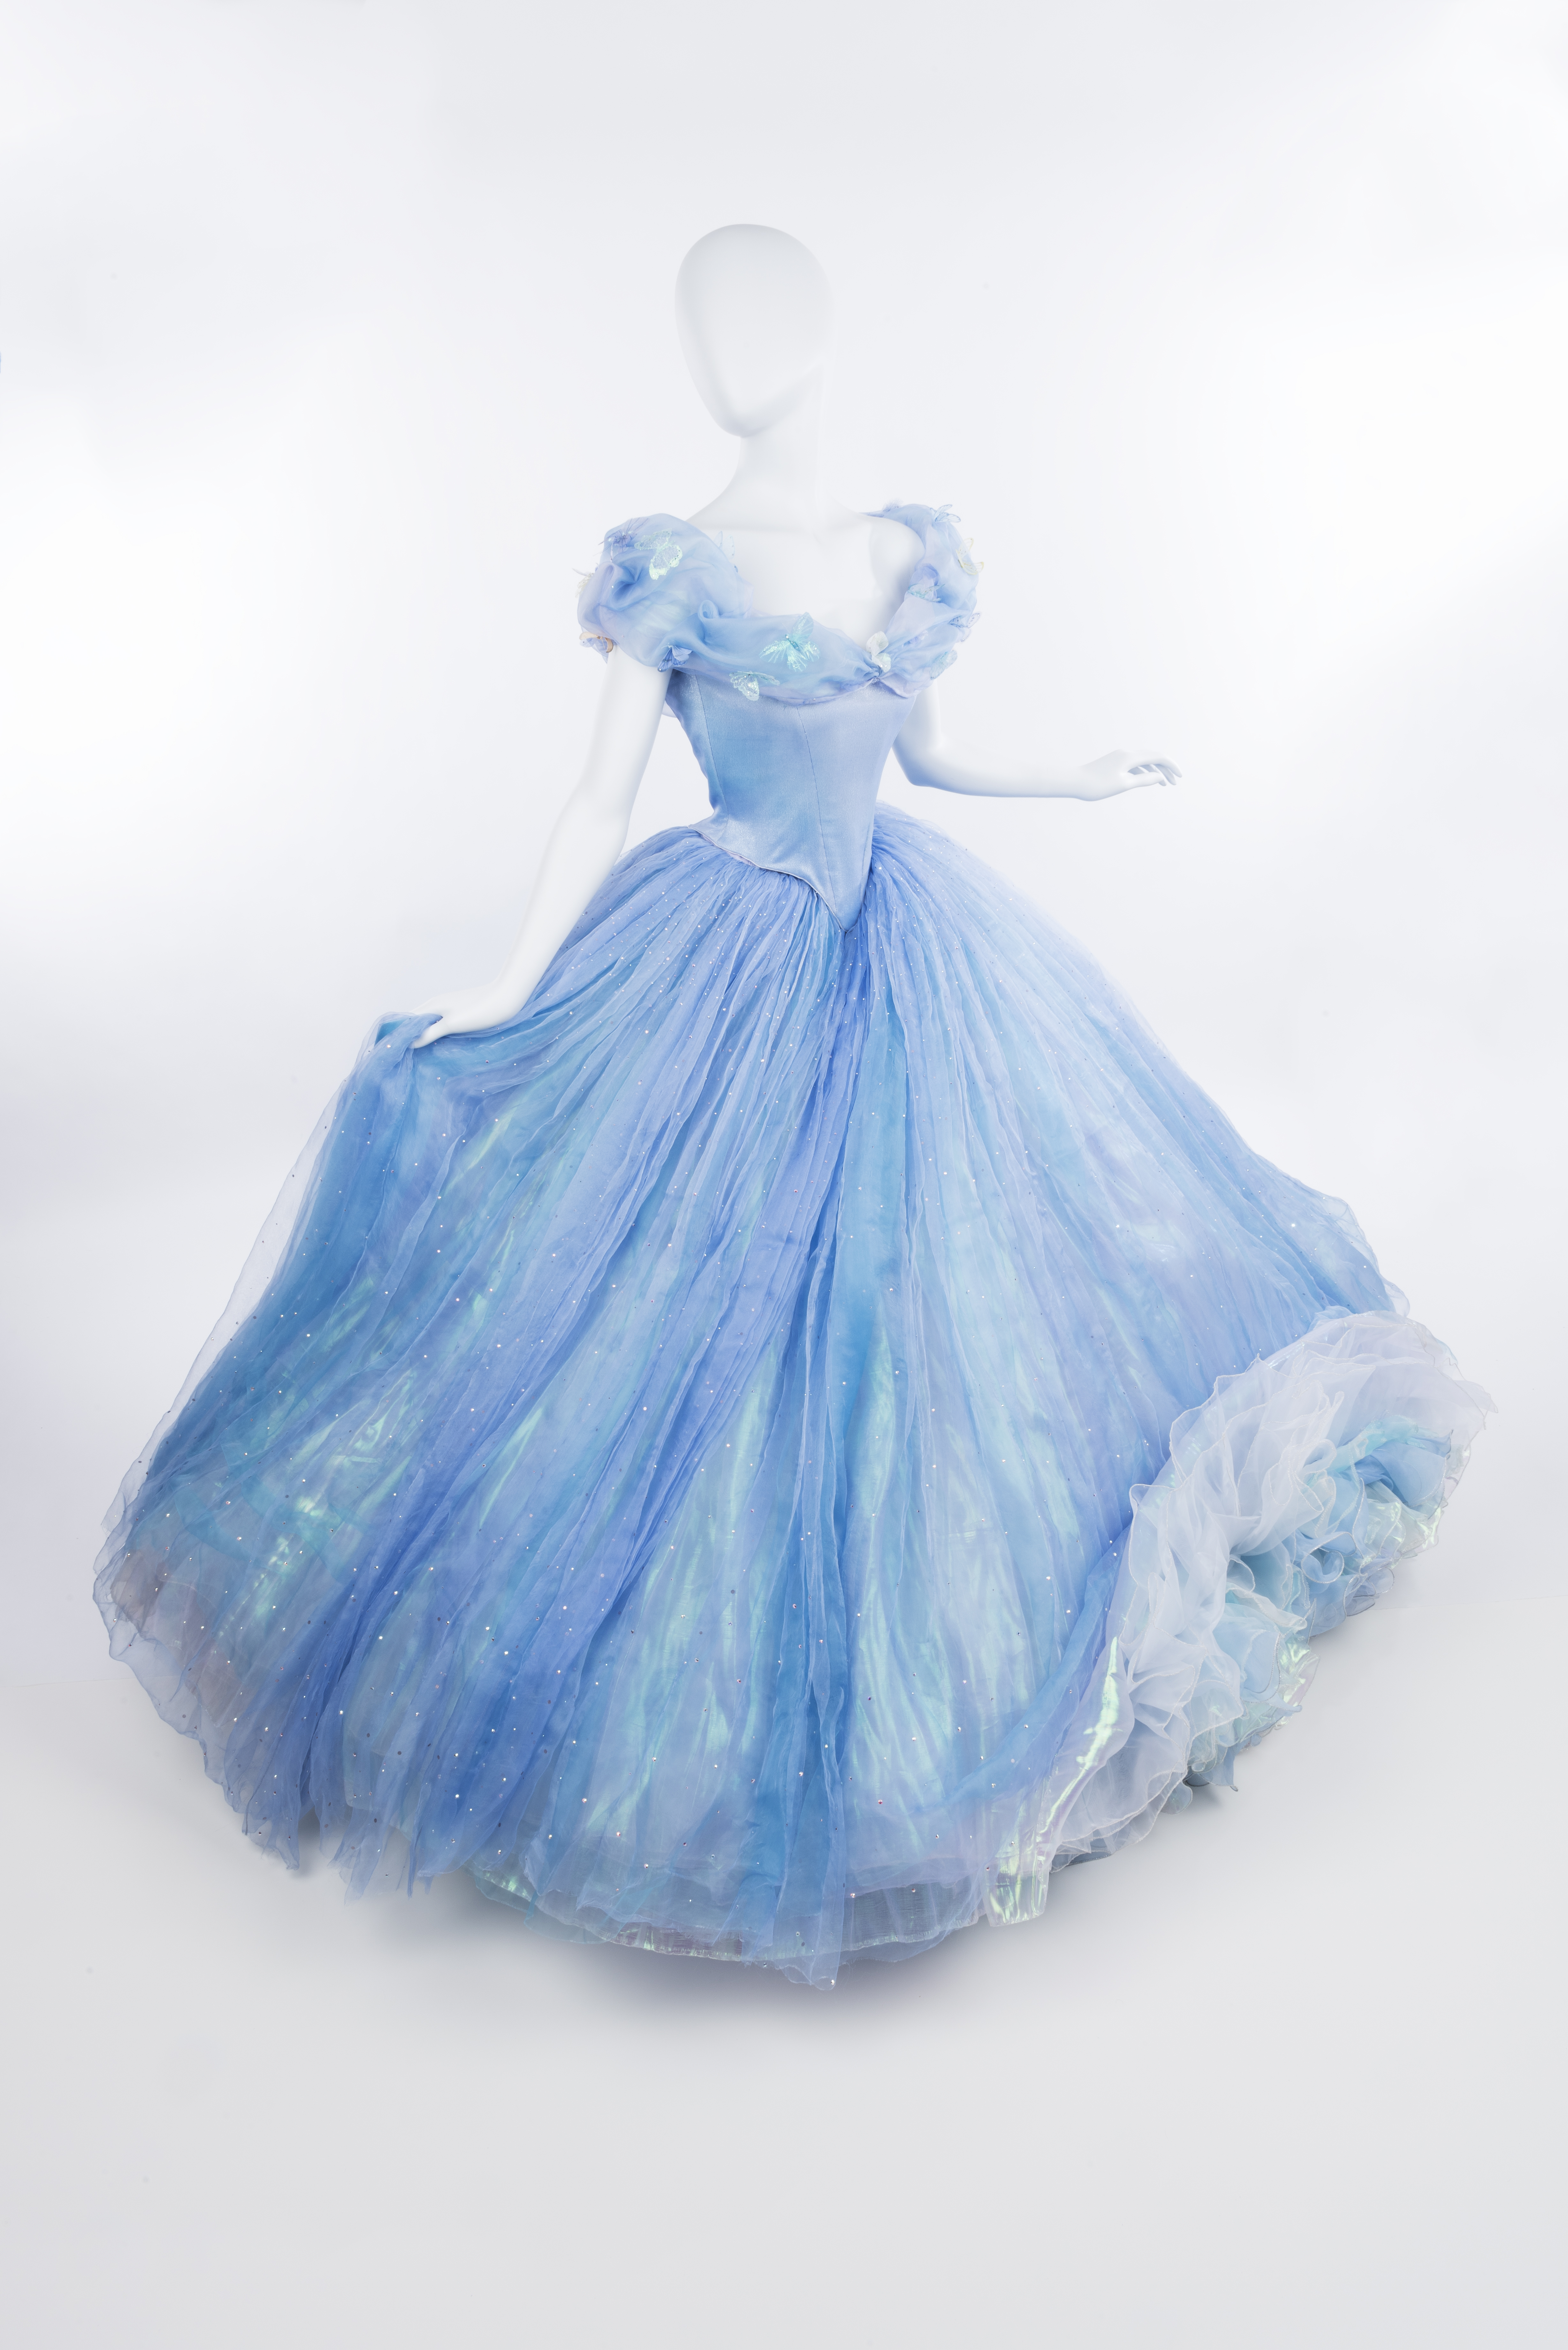 Blue ball gown worn by Lily James as Cinderella in the 2015 live-action film of the same name. Courtesy of The Henry Ford